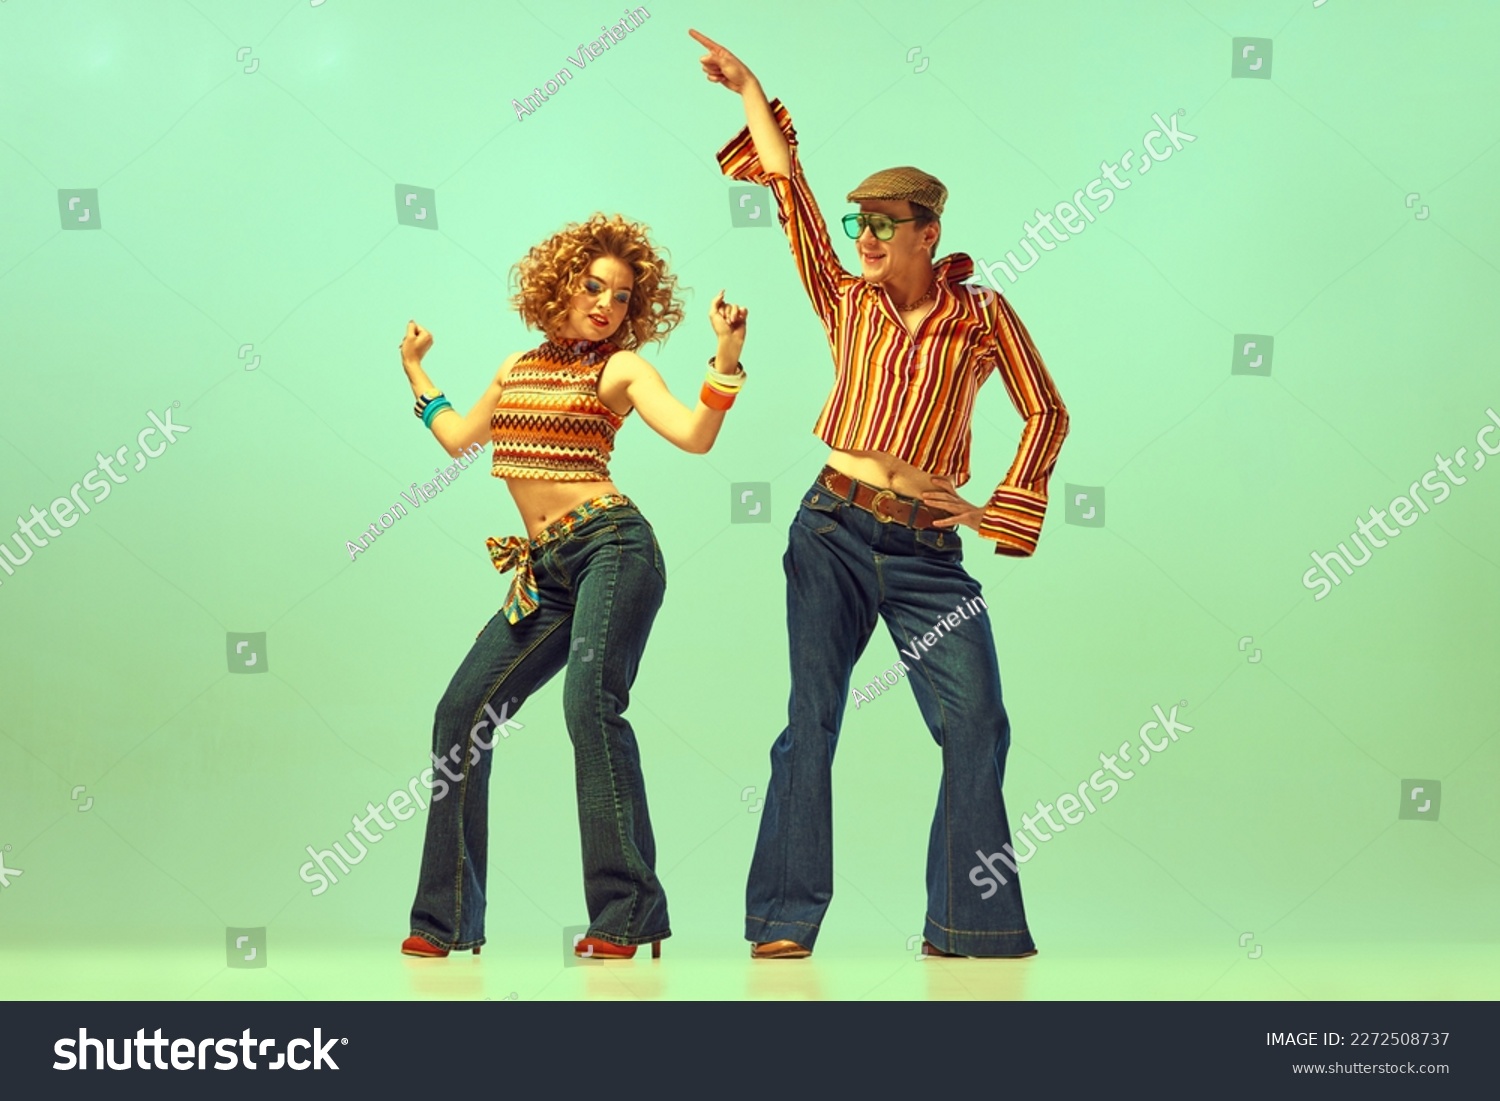 Happy and active dancers. Two excited people, man and woman in retro style clothes dancing disco dance over green background. 1970s, 1980s fashion, music, hippie lifestyle #2272508737